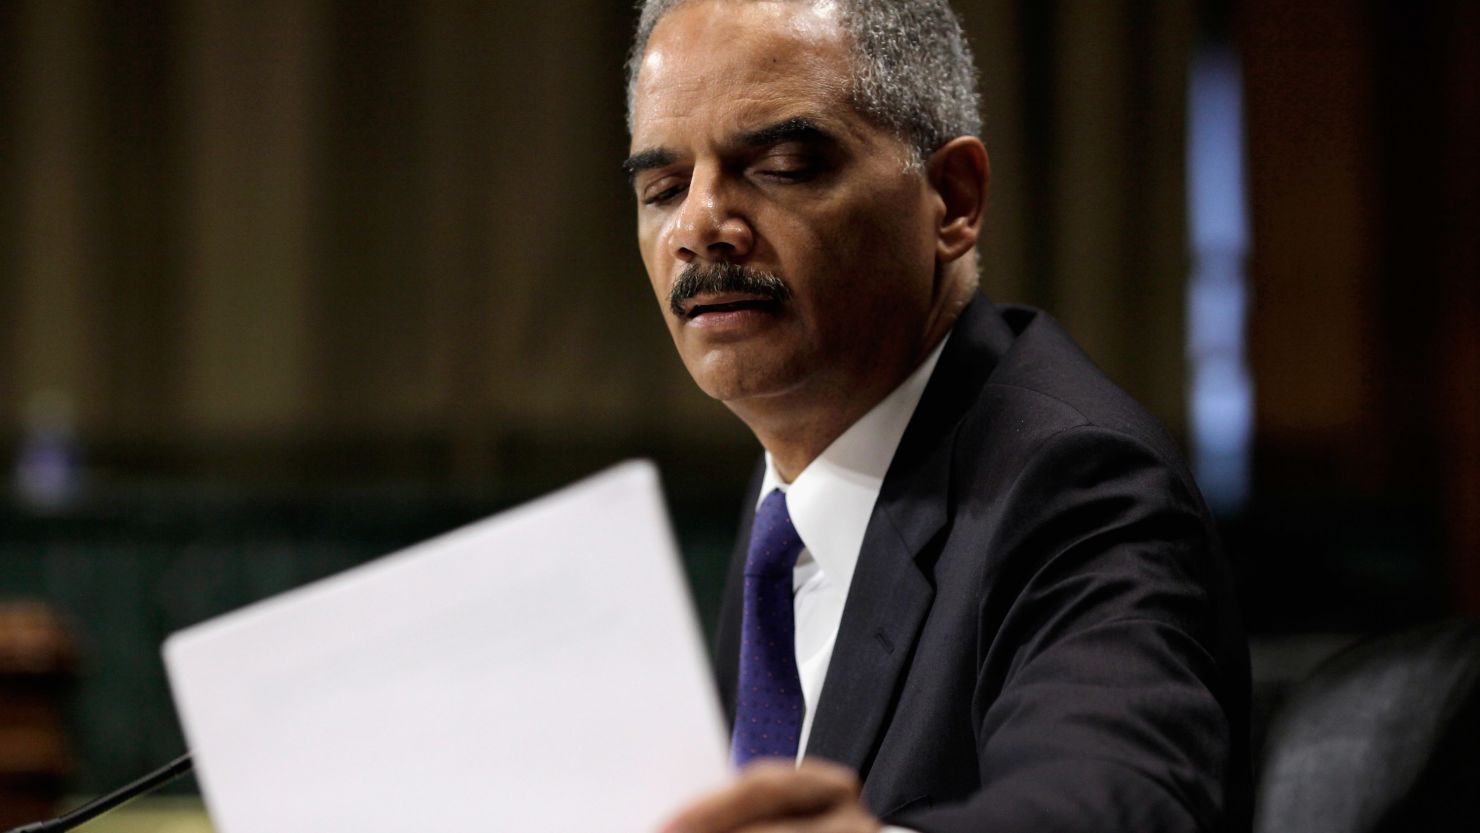 A House committee voted for a contempt action Wednesday against Attorney General Eric Holder.